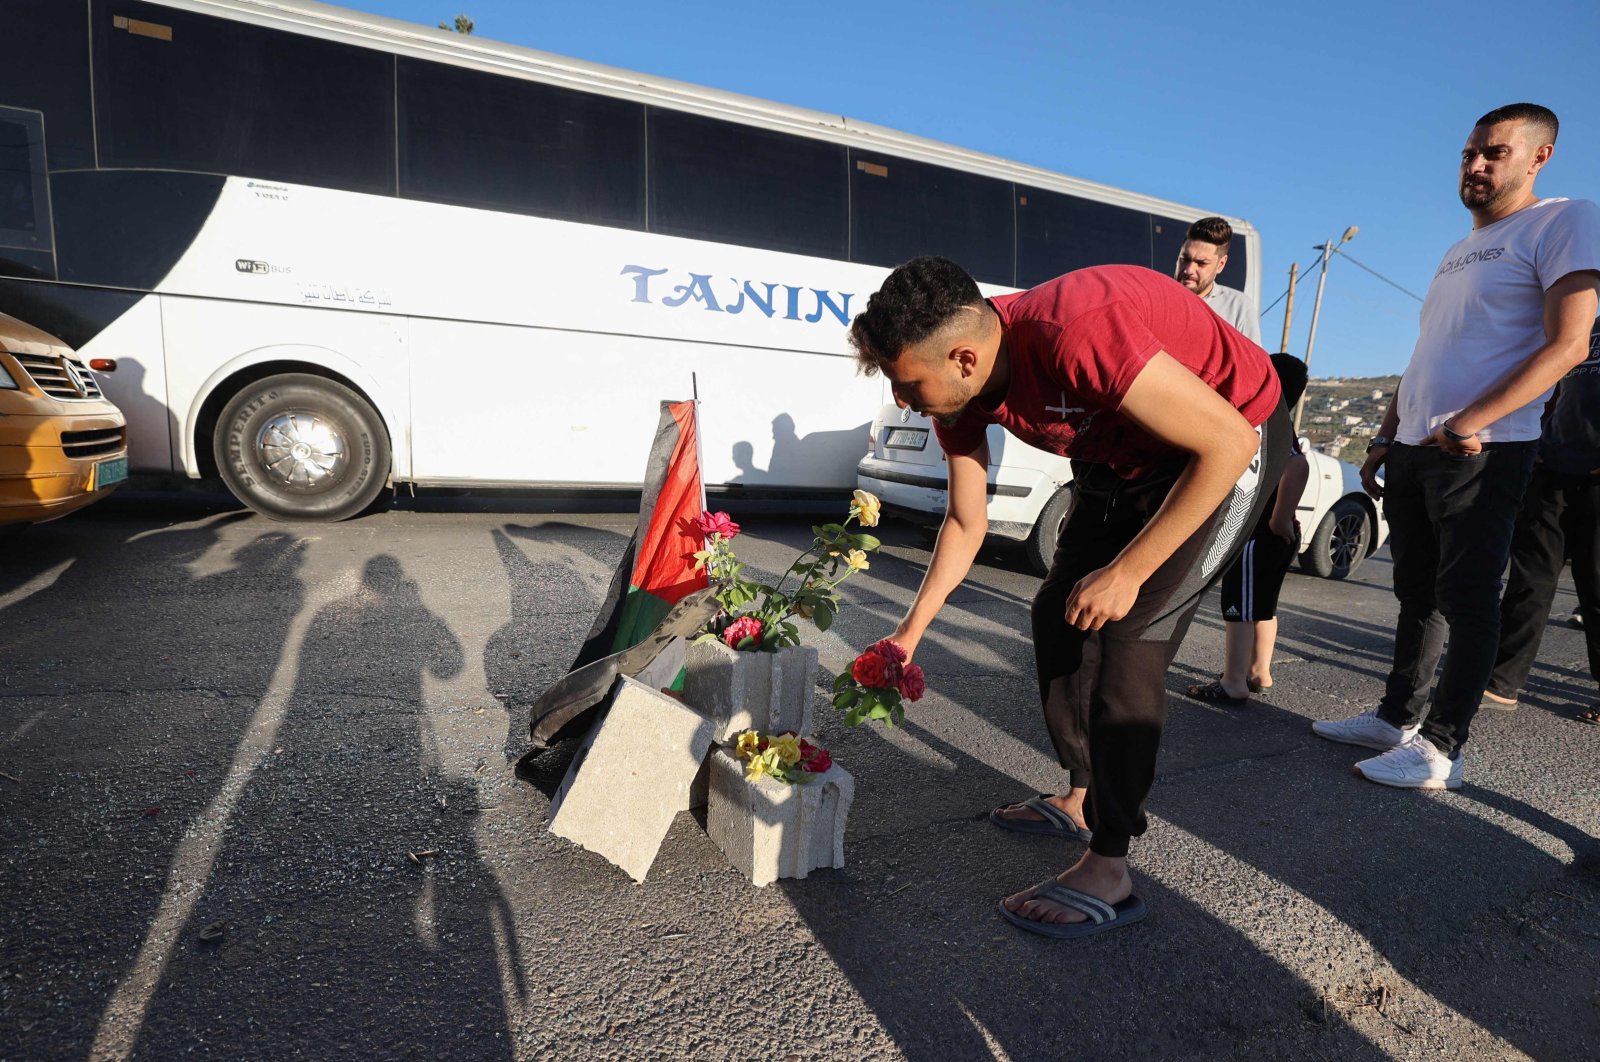 Mourners lay roses at the site where three Palestinians were killed by Israeli forces, Jenin, occupied West Bank, Palestine, Aug. 6, 2023. (AFP Photo)